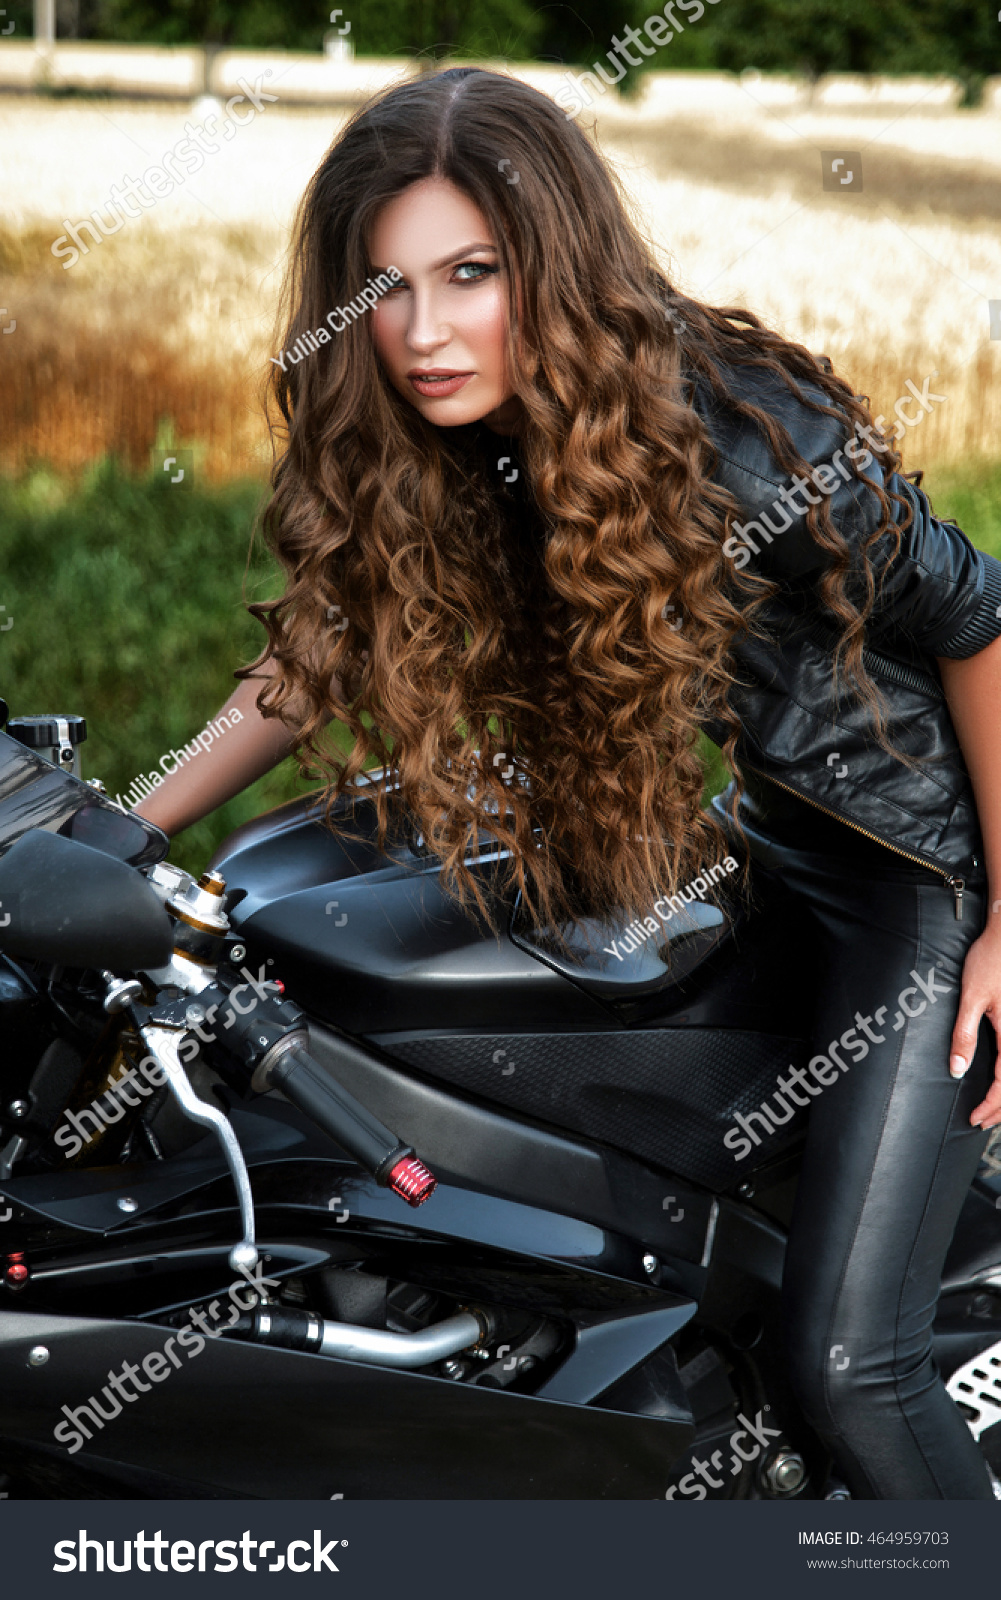 charmayne stevens recommends pictures of biker woman pic